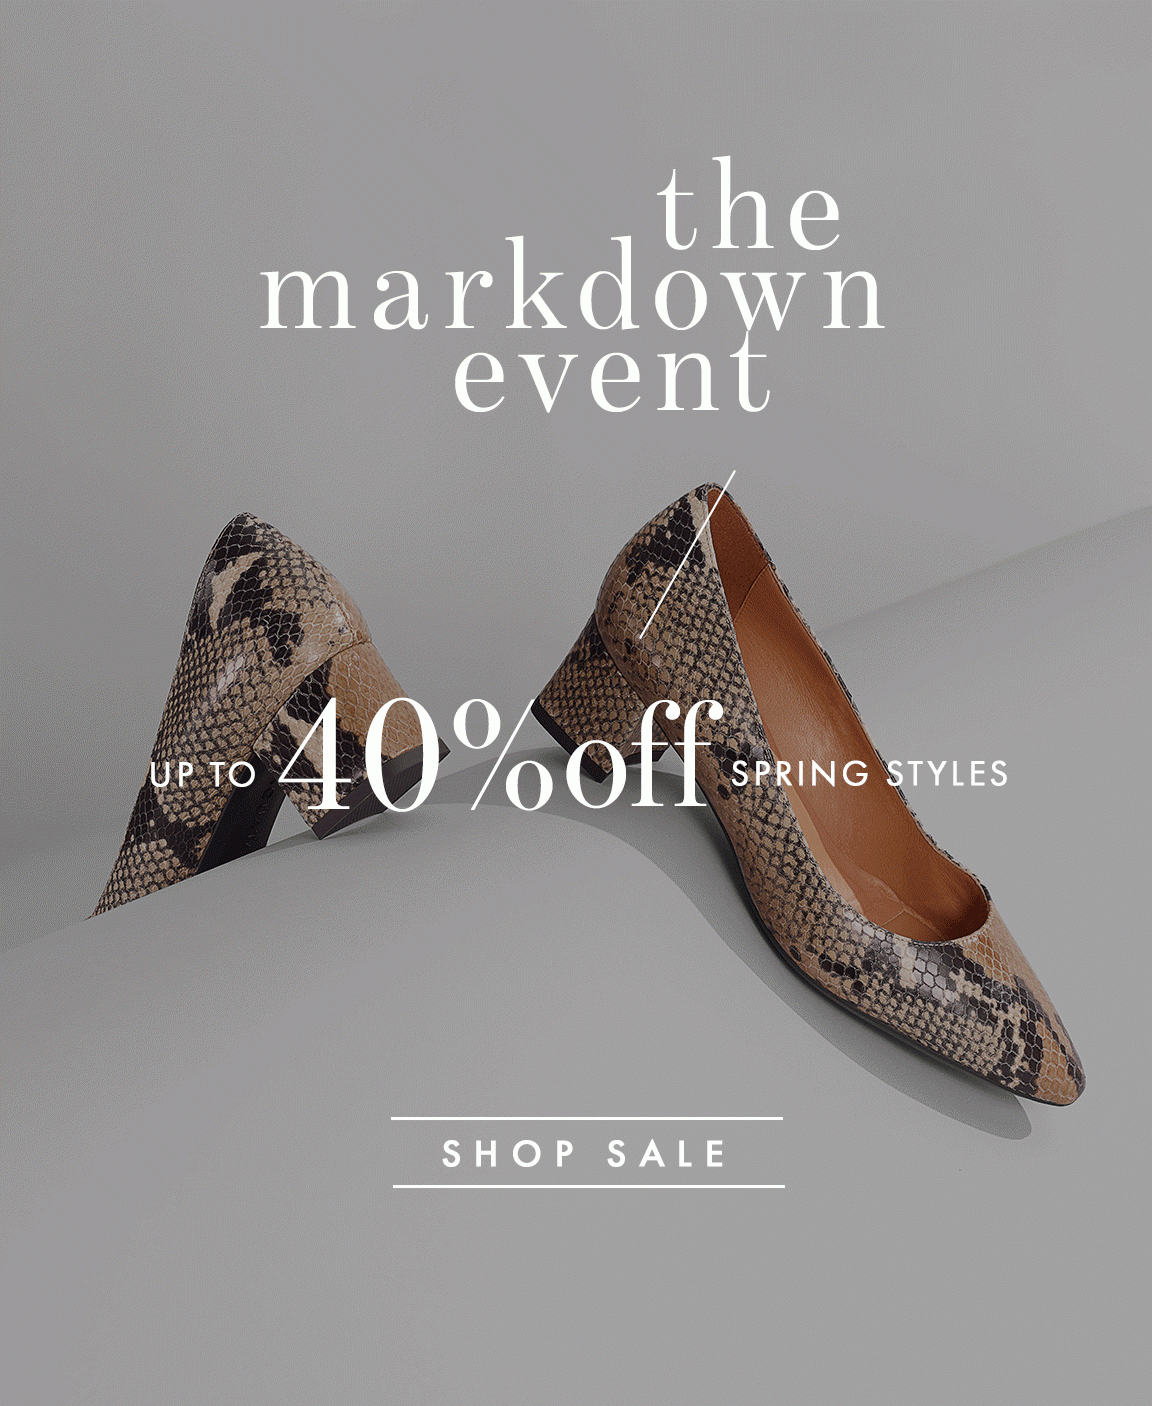 The Markdown Event